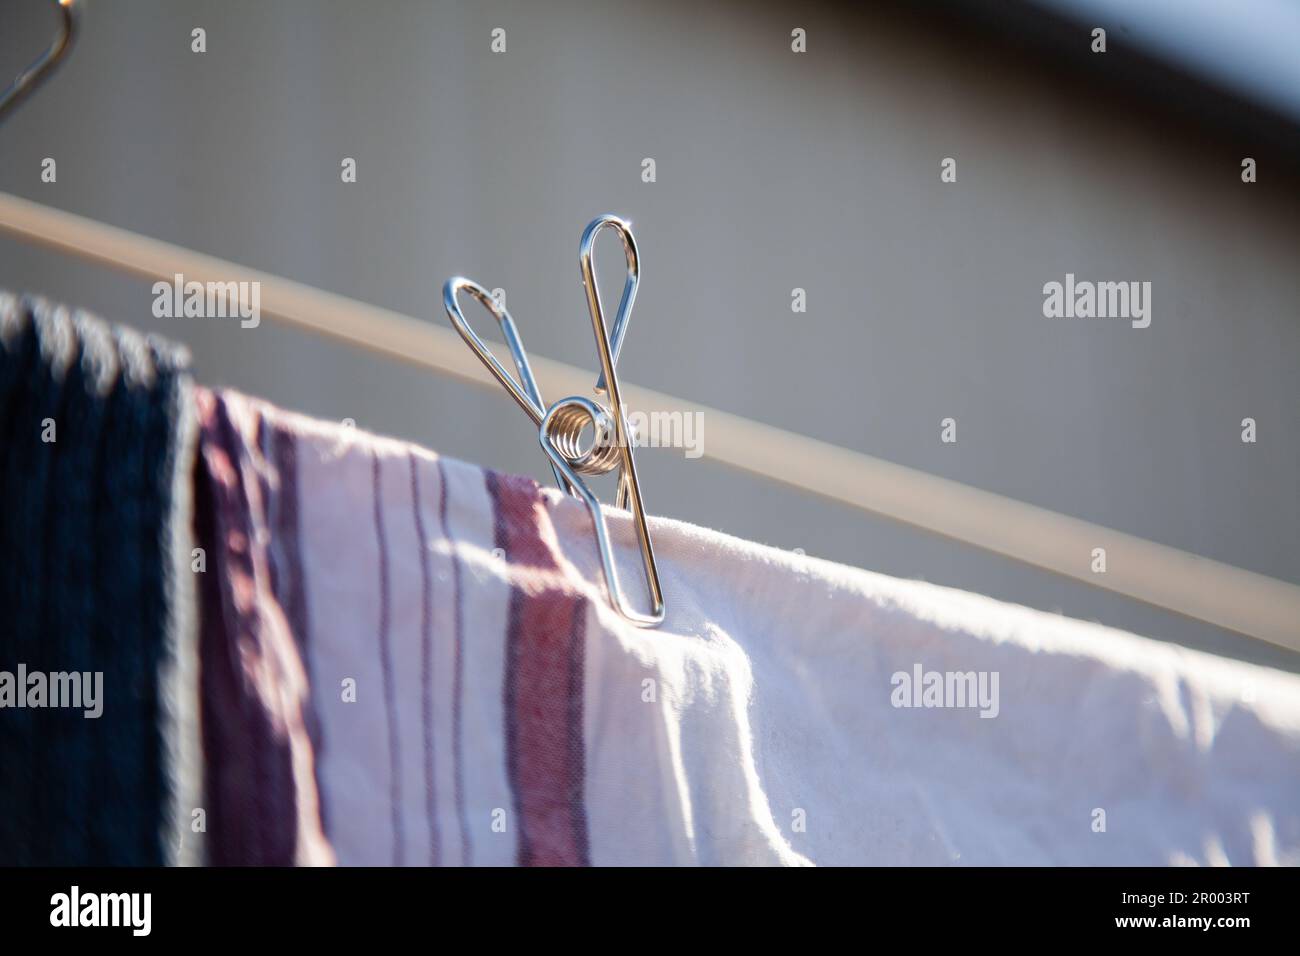 10 Best Clothes Pegs in Australia – Lifestyle Clotheslines